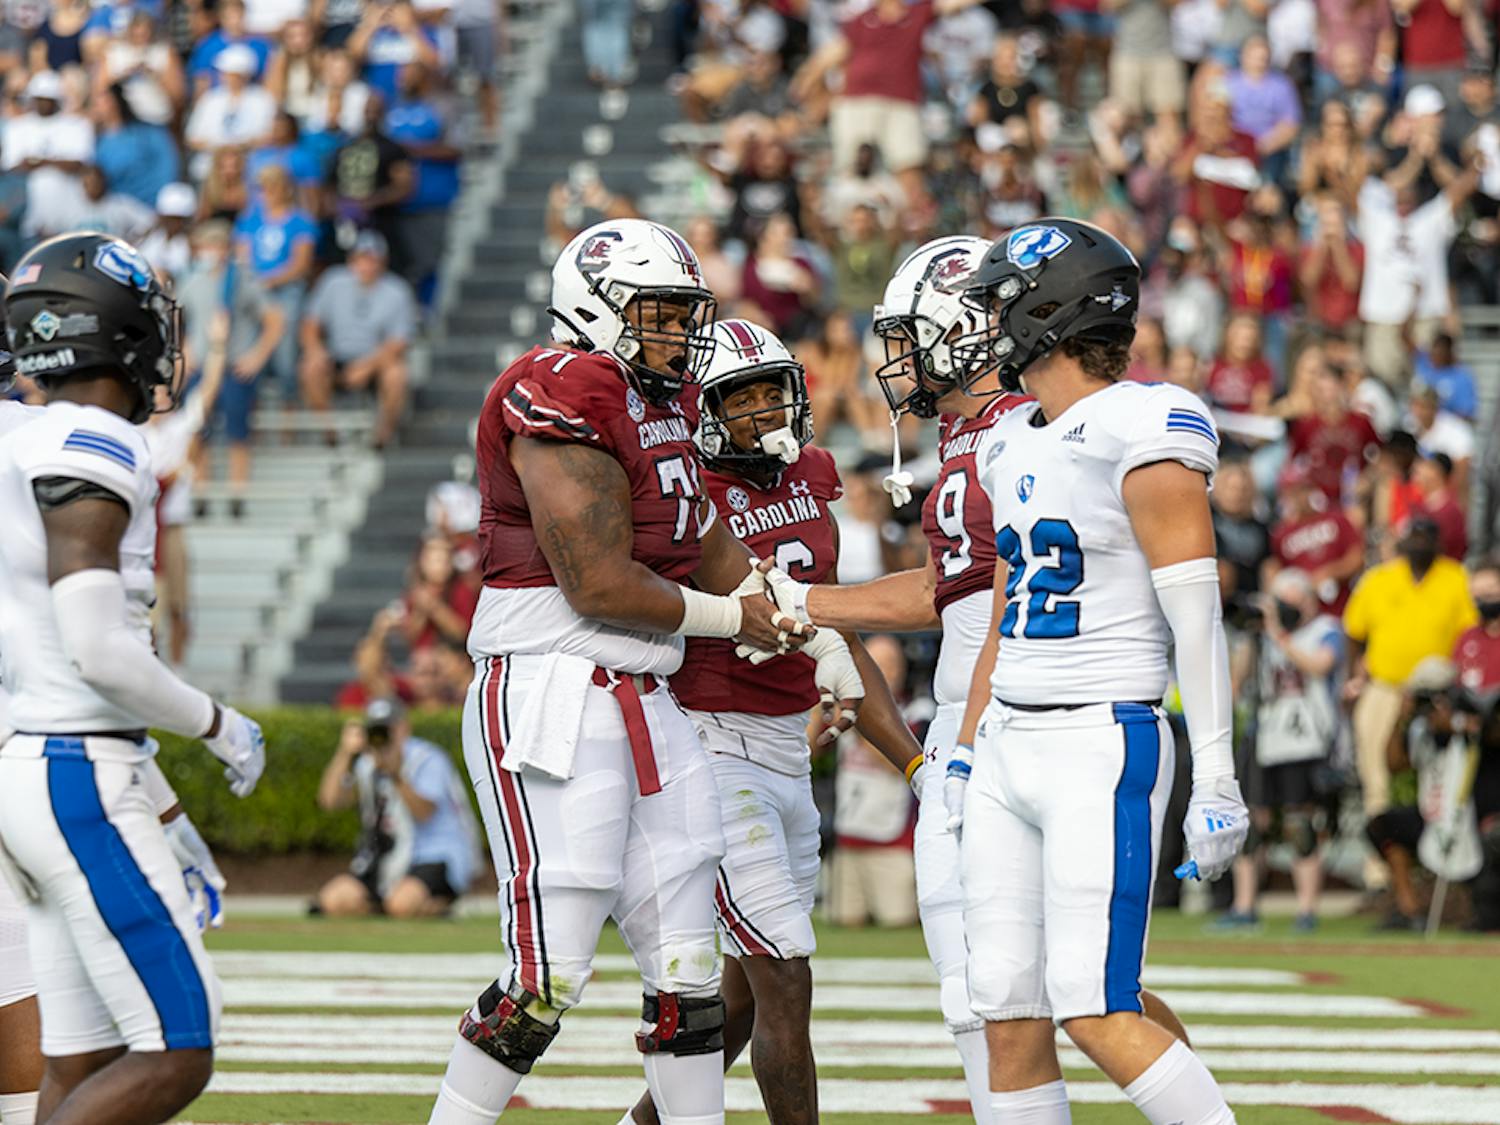 Fifth-year tight end Nick Muse and redshirt senior offensive lineman Eric Douglas celebrate a touchdown pass from graduate student quarterback Zeb Noland. Muse ran for a 2-point conversion, bringing the Gamecocks' score to 8 at the top of the first quarter.